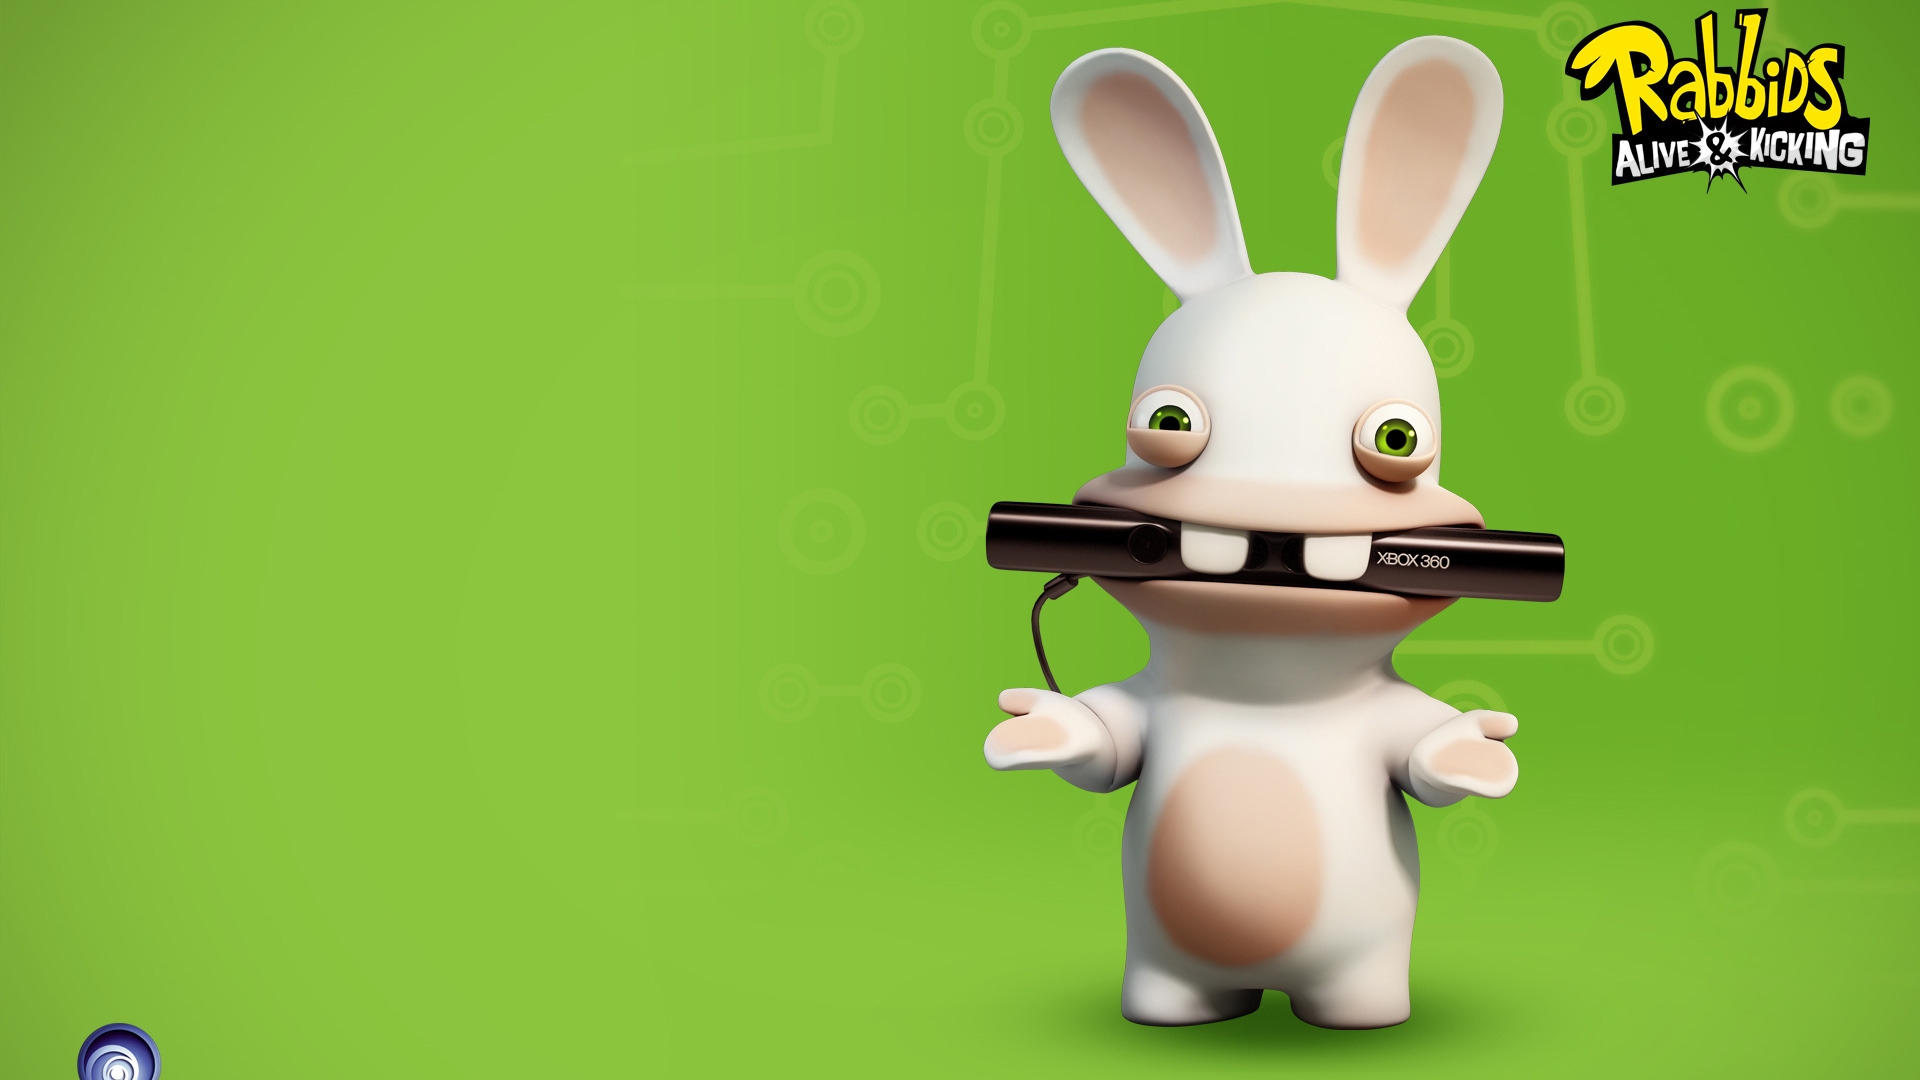 Rabbids Alive and Kicking Game for 1920 x 1080 HDTV 1080p resolution